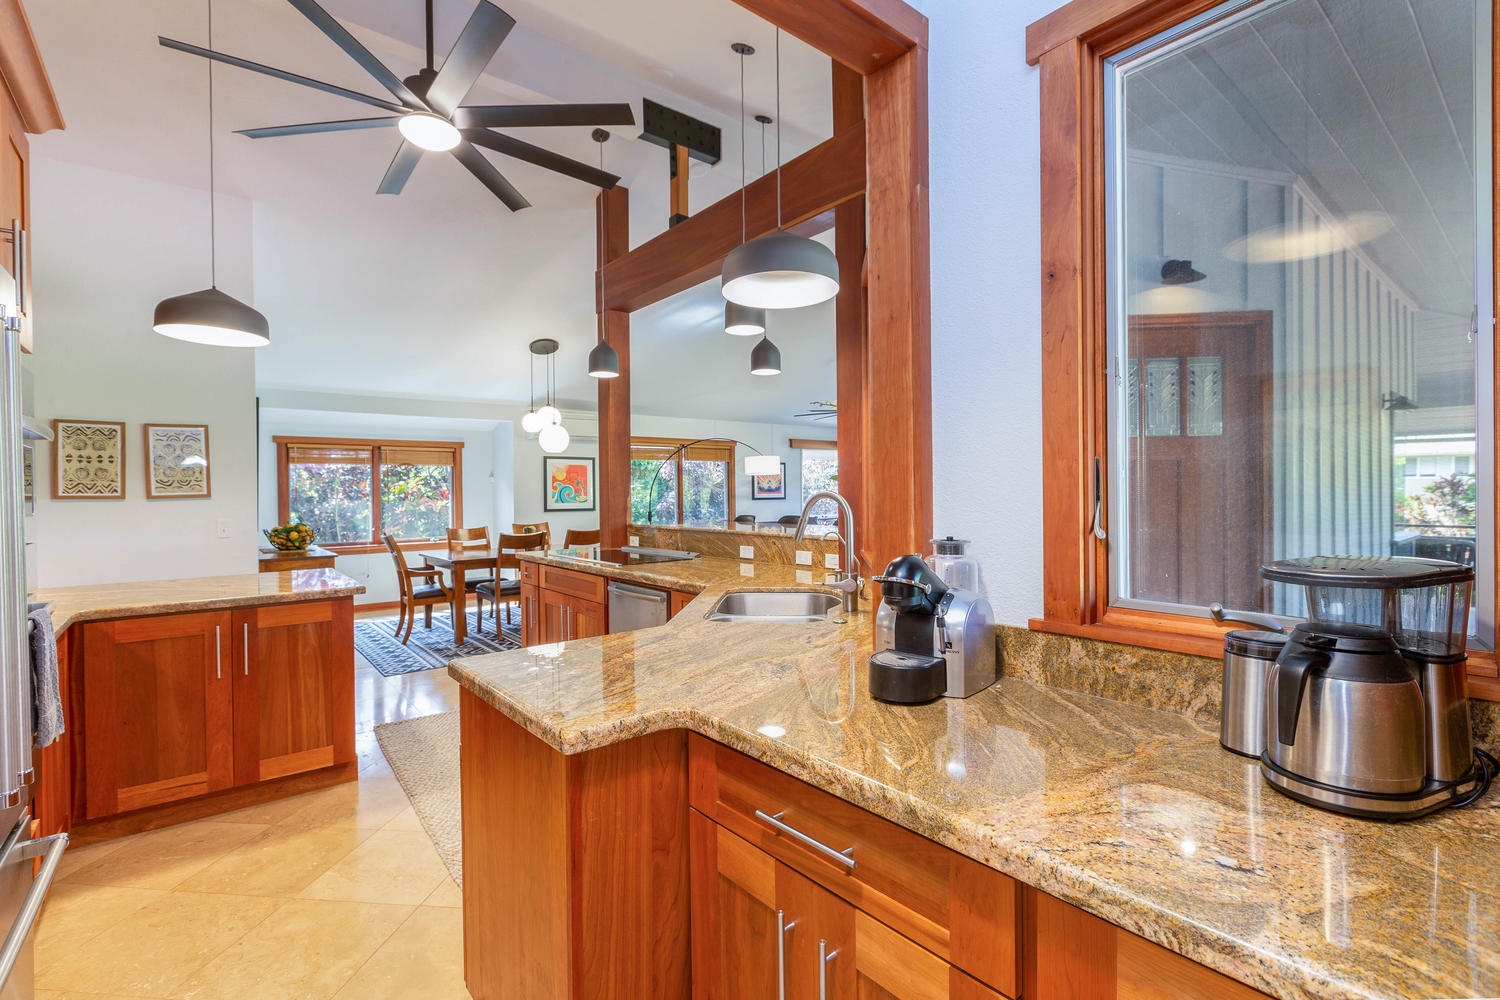 Princeville Vacation Rentals, Makana Lei - Plenty of counter space for meal preparation